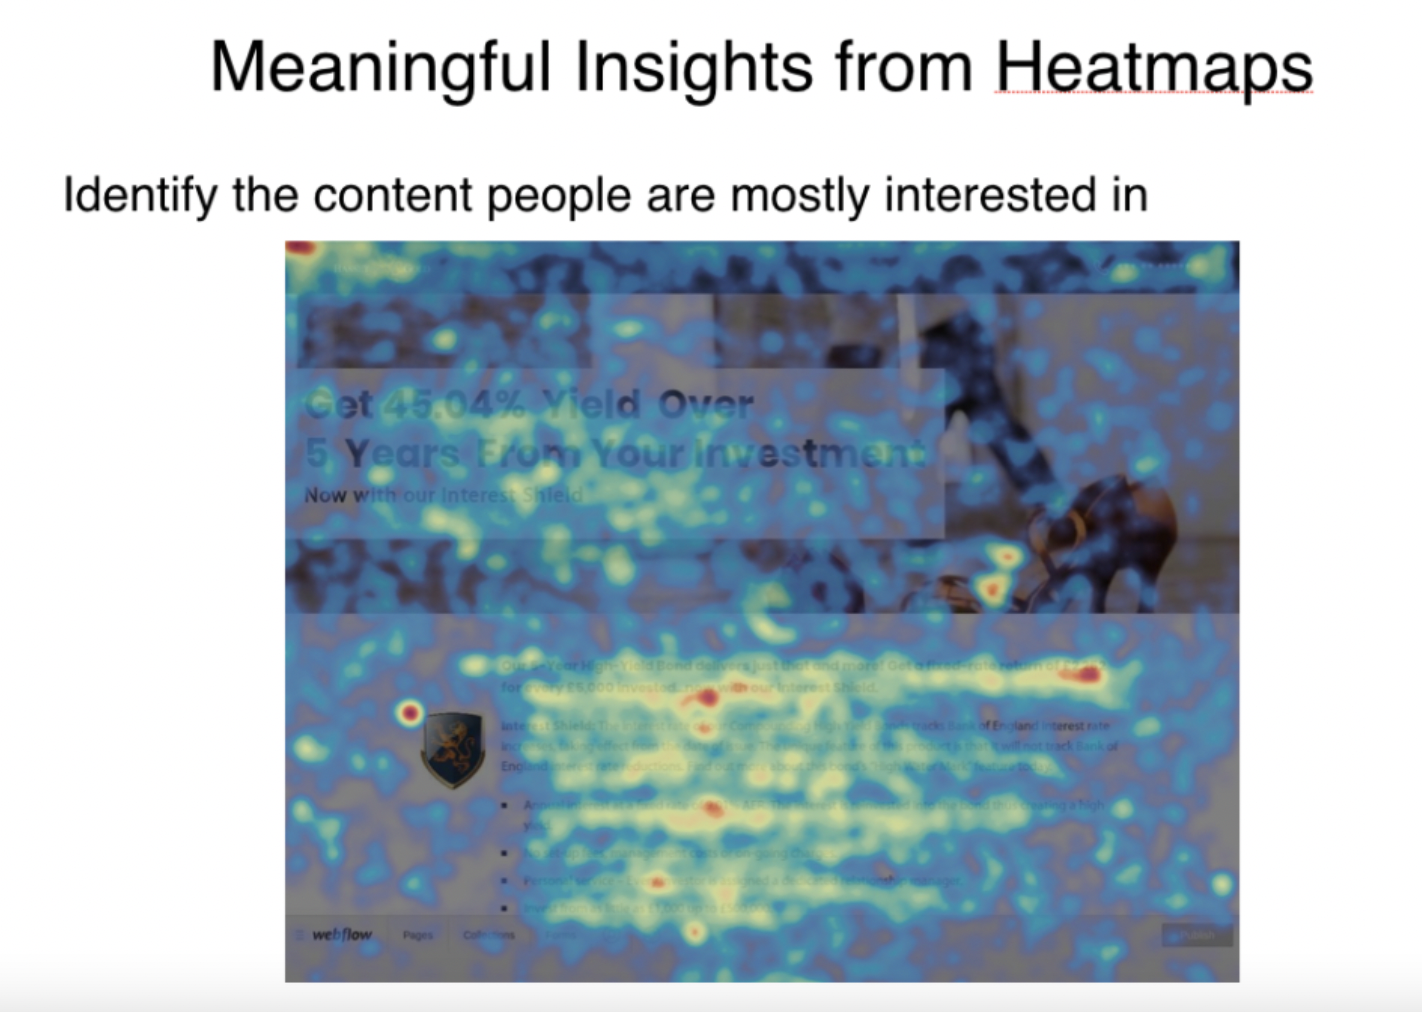 How to get meaningful insights from heatmaps by identifying the content people are most interested in